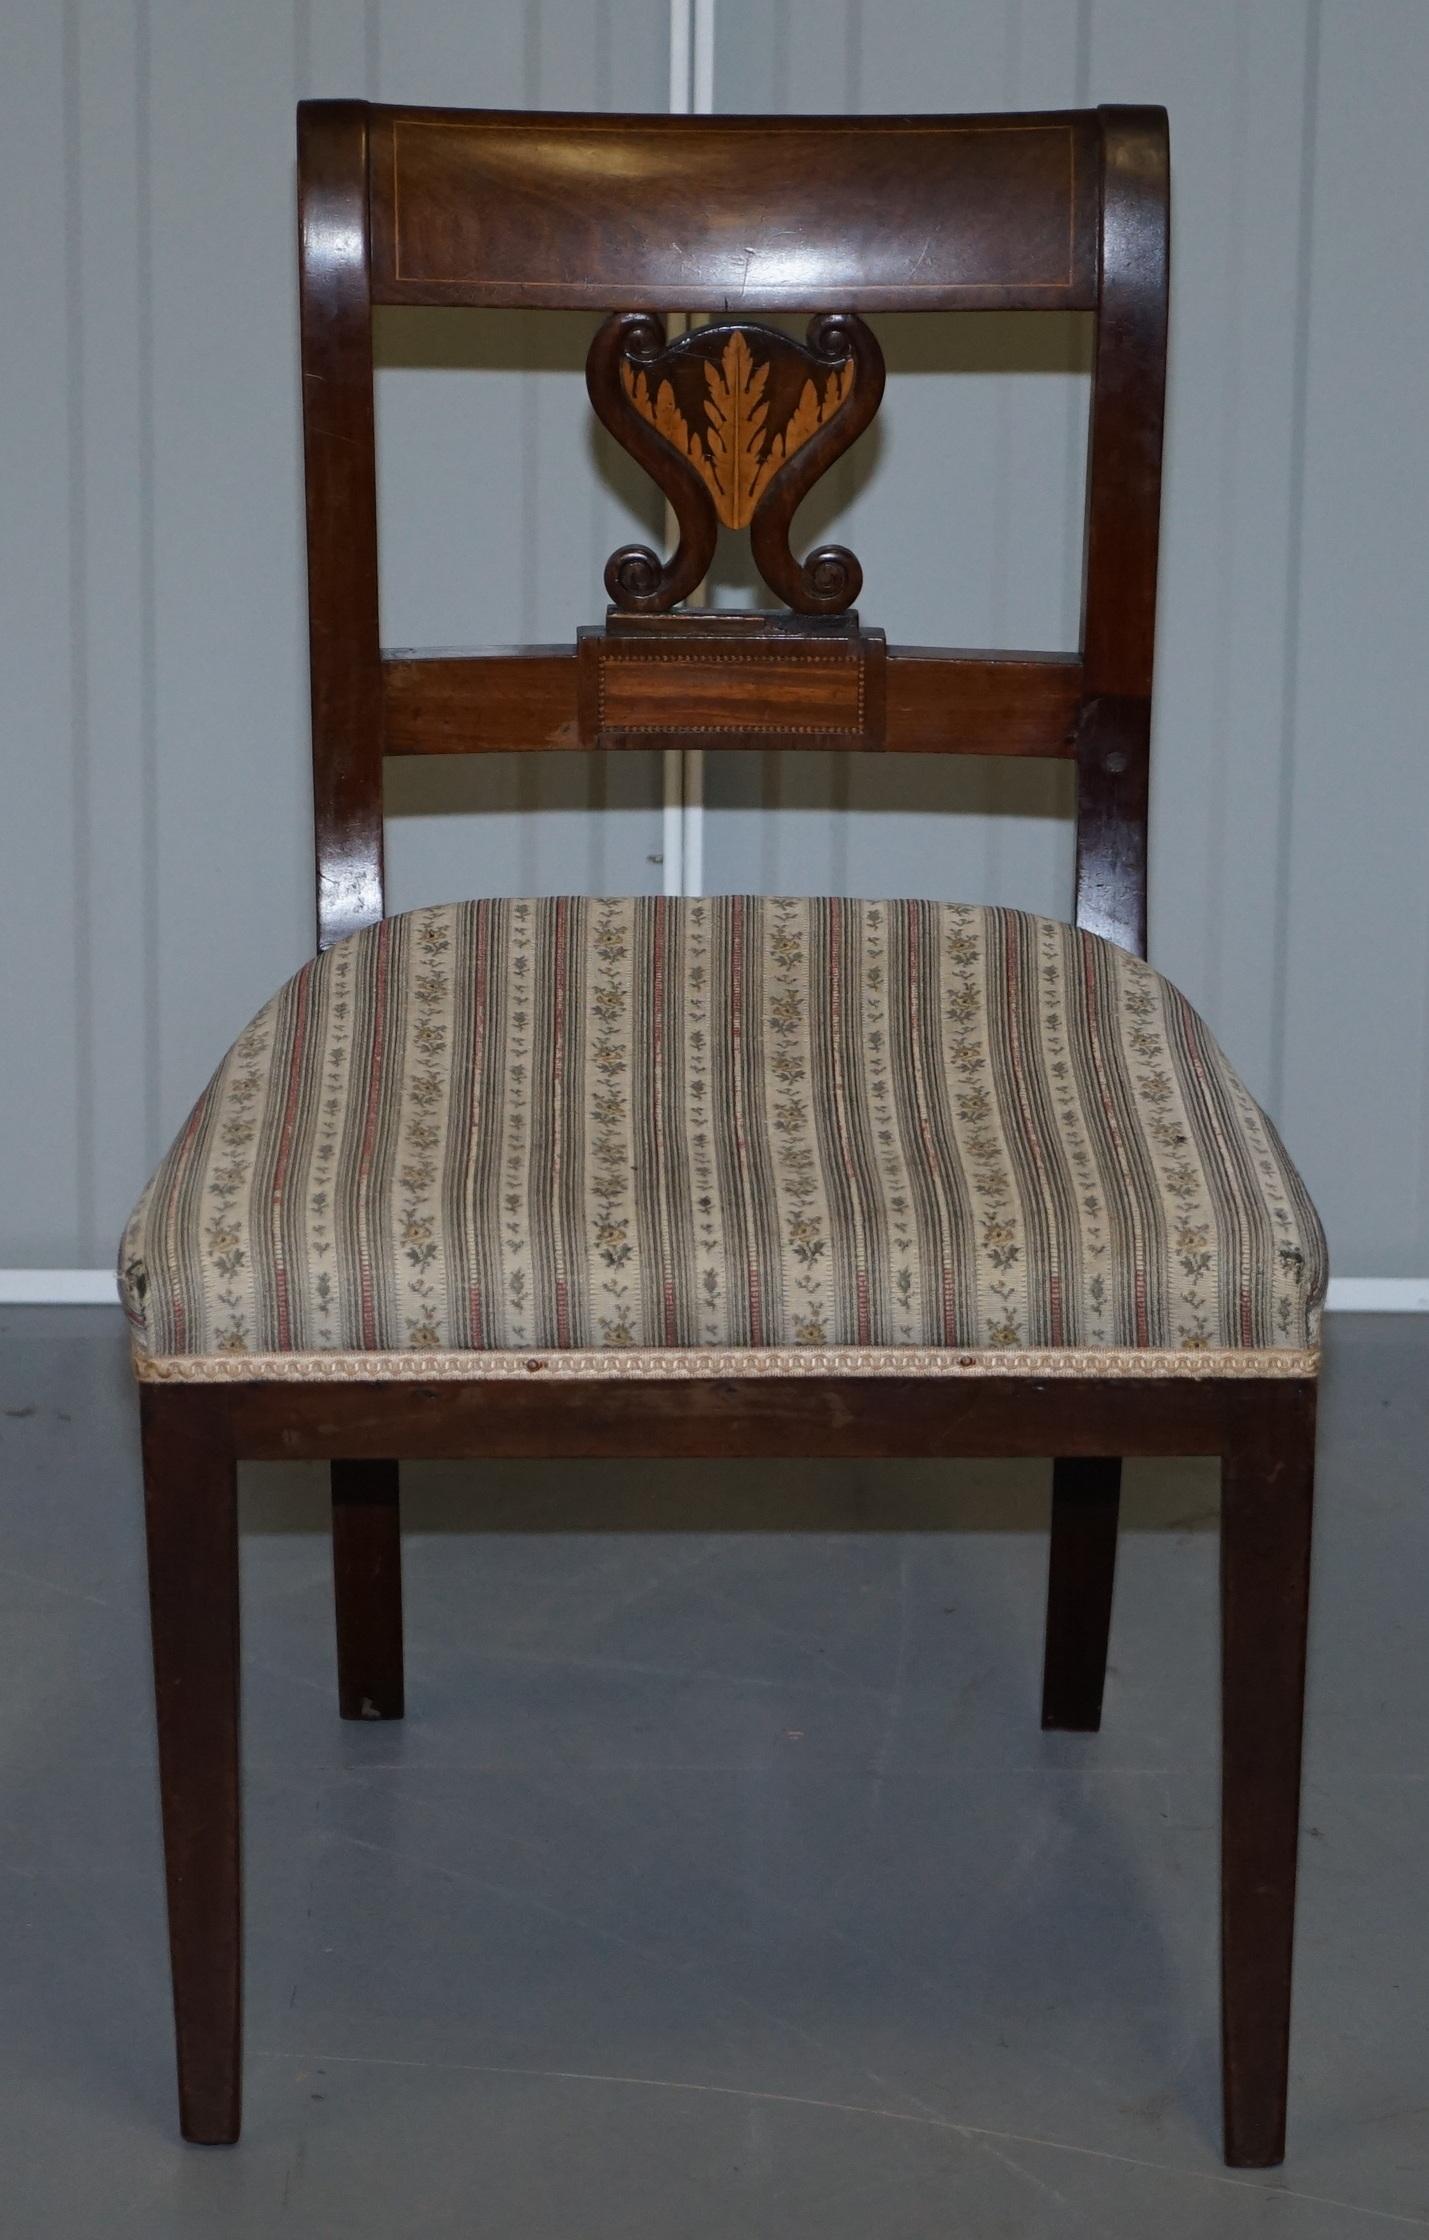 We are delighted to offer for sale this nice early Victorian French walnut inlaid side or bedroom dressing table chair

A very well made and decorative piece, the timber patina is sublime, the inlay to the back splat is especially special 

We